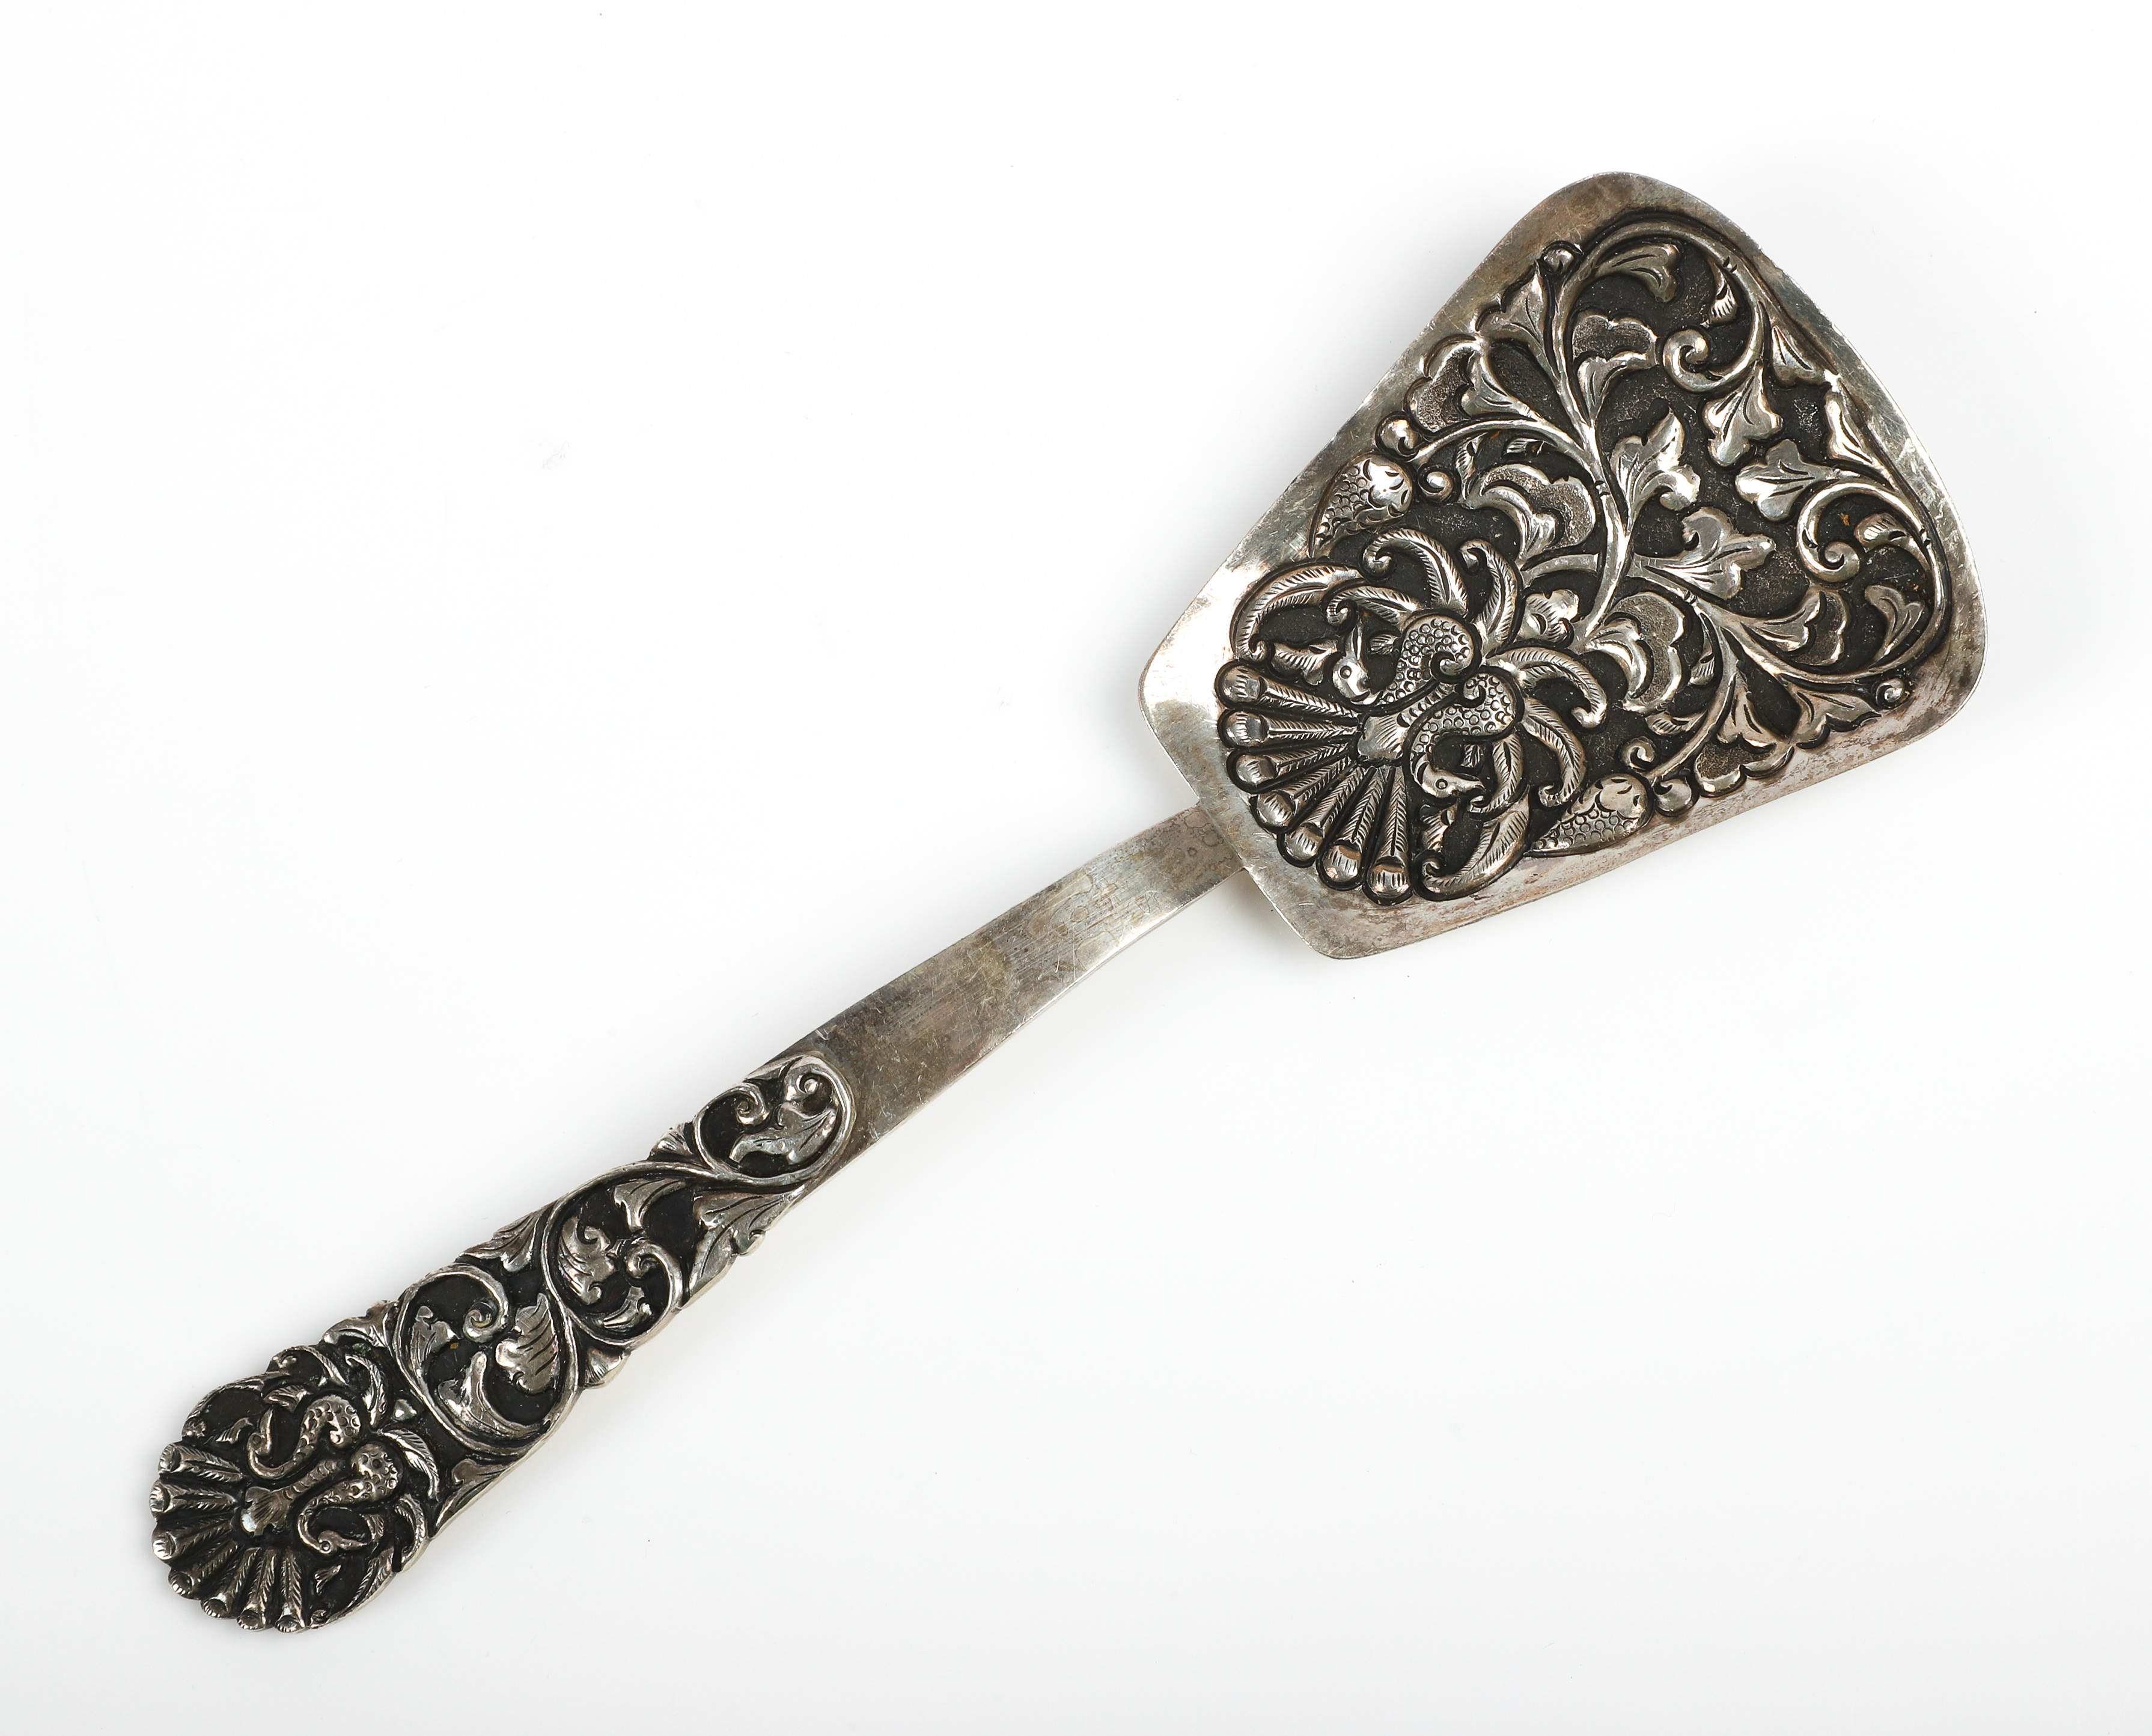 800 Silver spoon shovel, embossed with